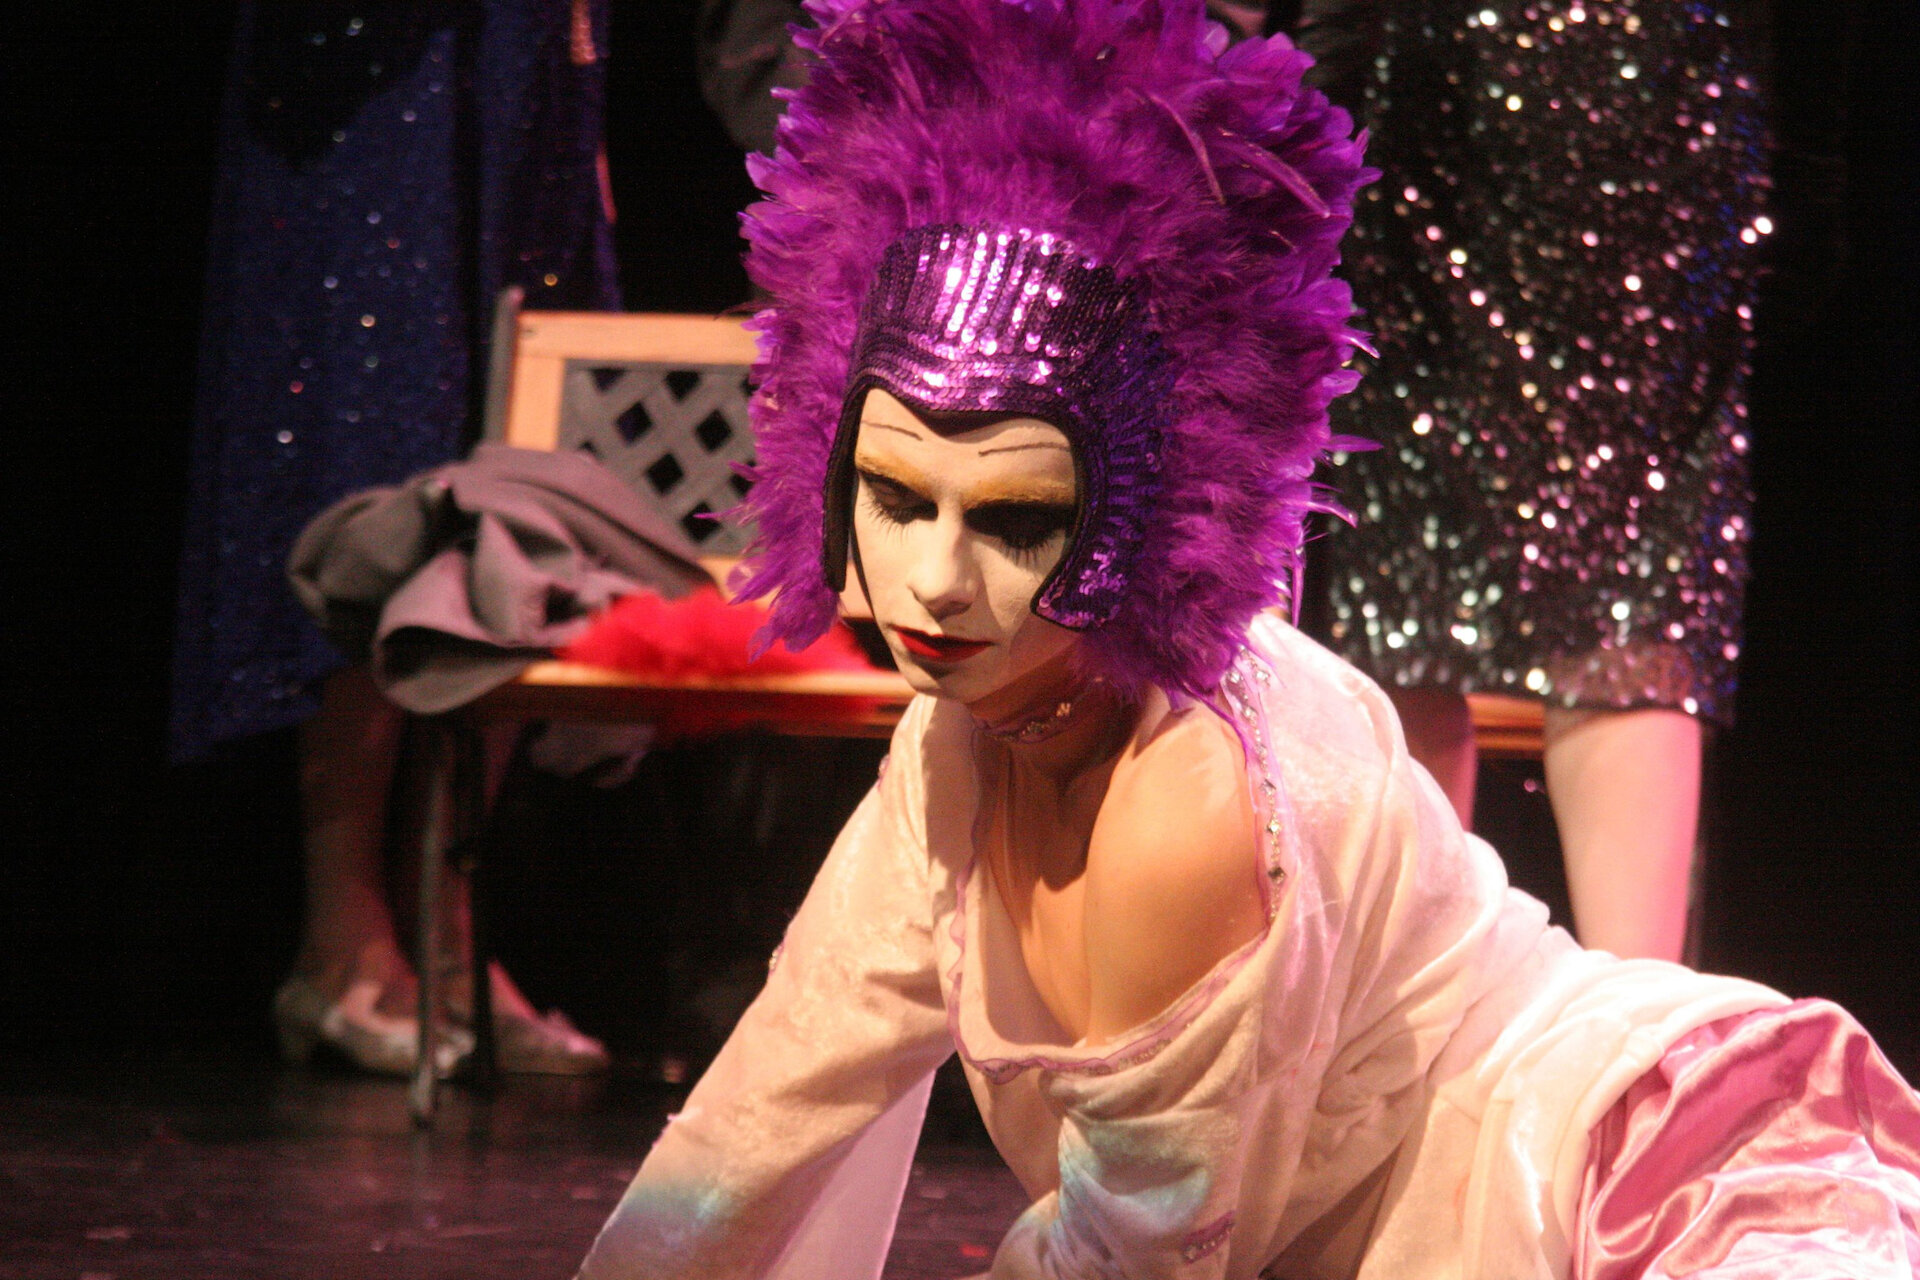 Harry starring in Shetland Youth Theatre's production of Midsummer Night's Dream back in 2006. Photo: Stuart Hubbard.